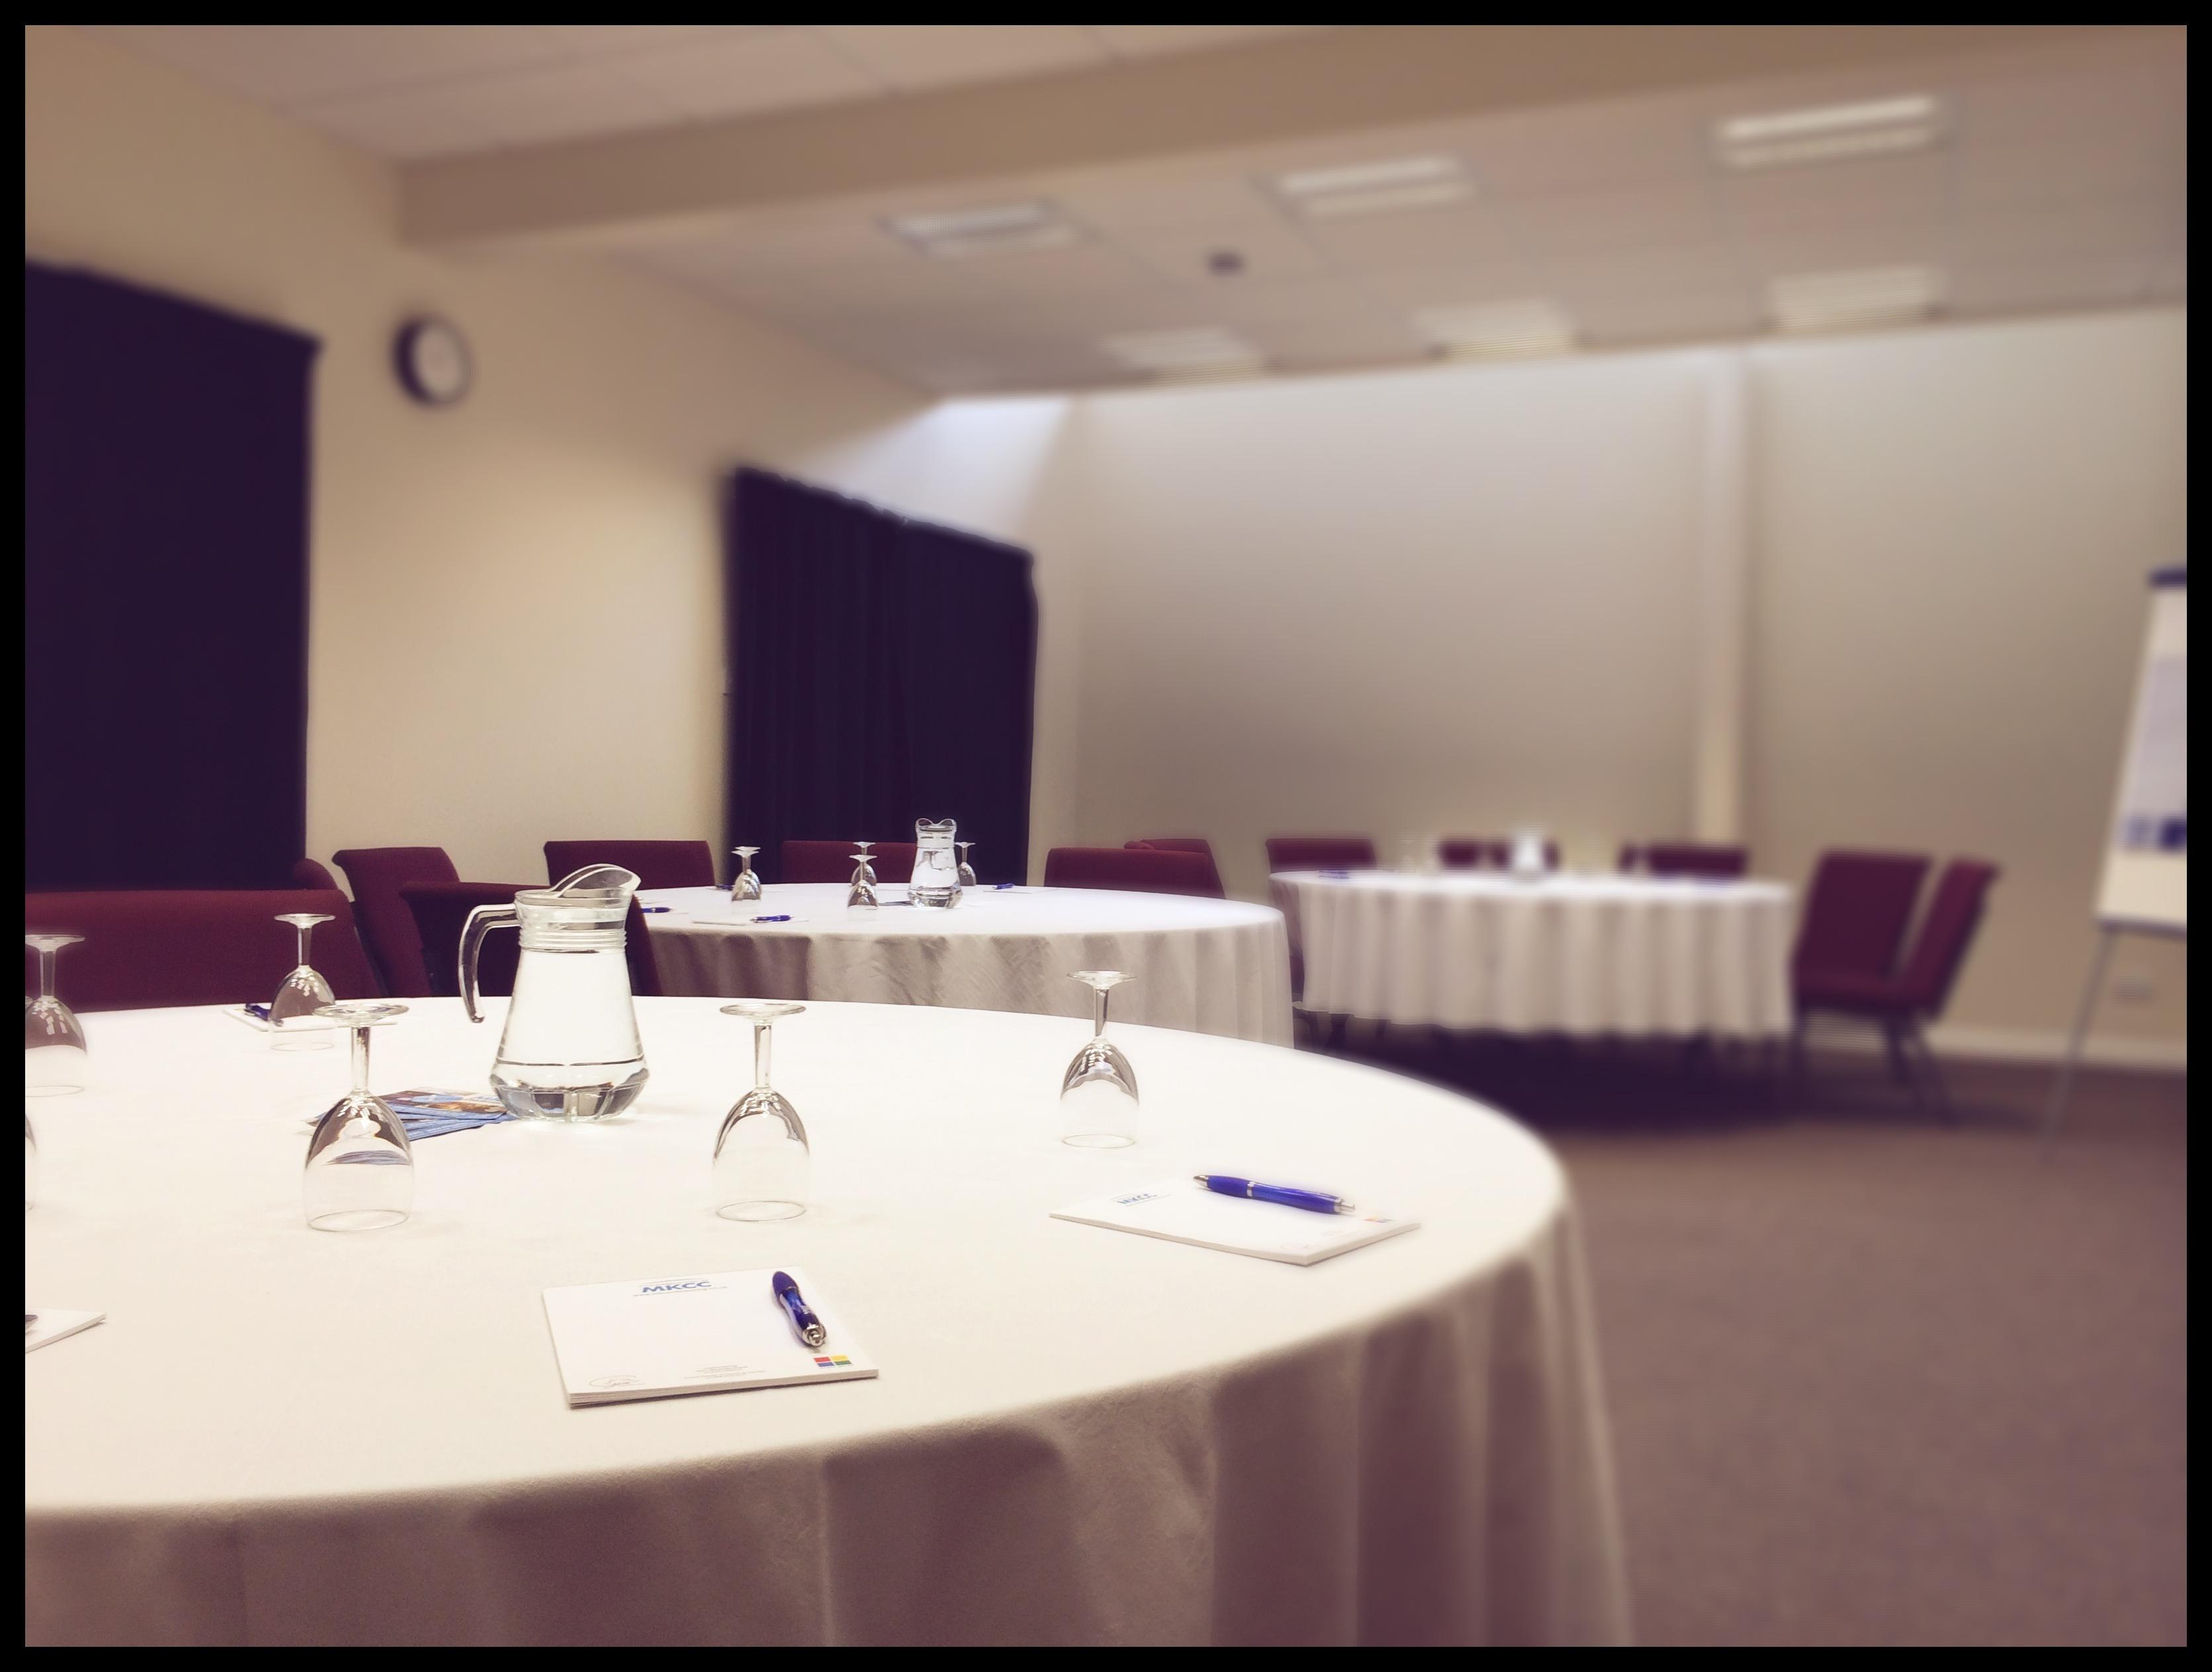 Ridley Suite, MK Conferencing photo #1